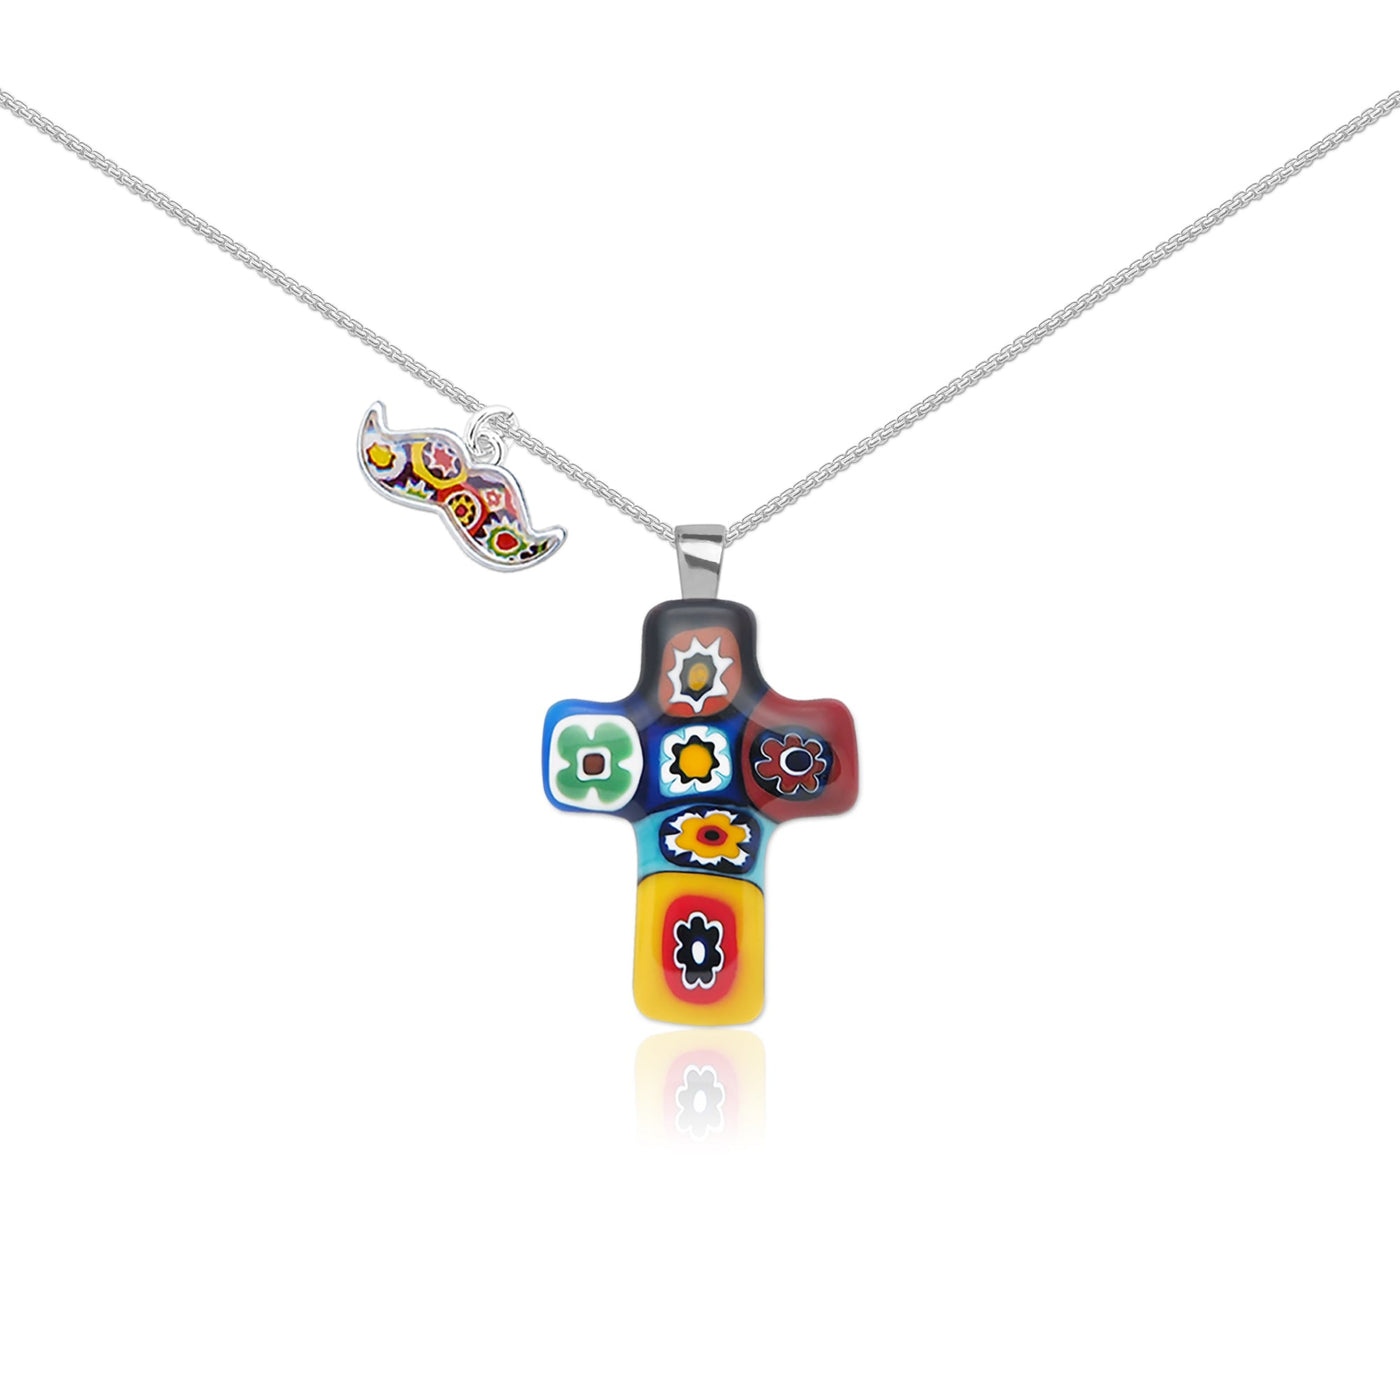 Artylish x Cross Necklace - 0.85mm 925 Sterling Silver - Pendant Necklace